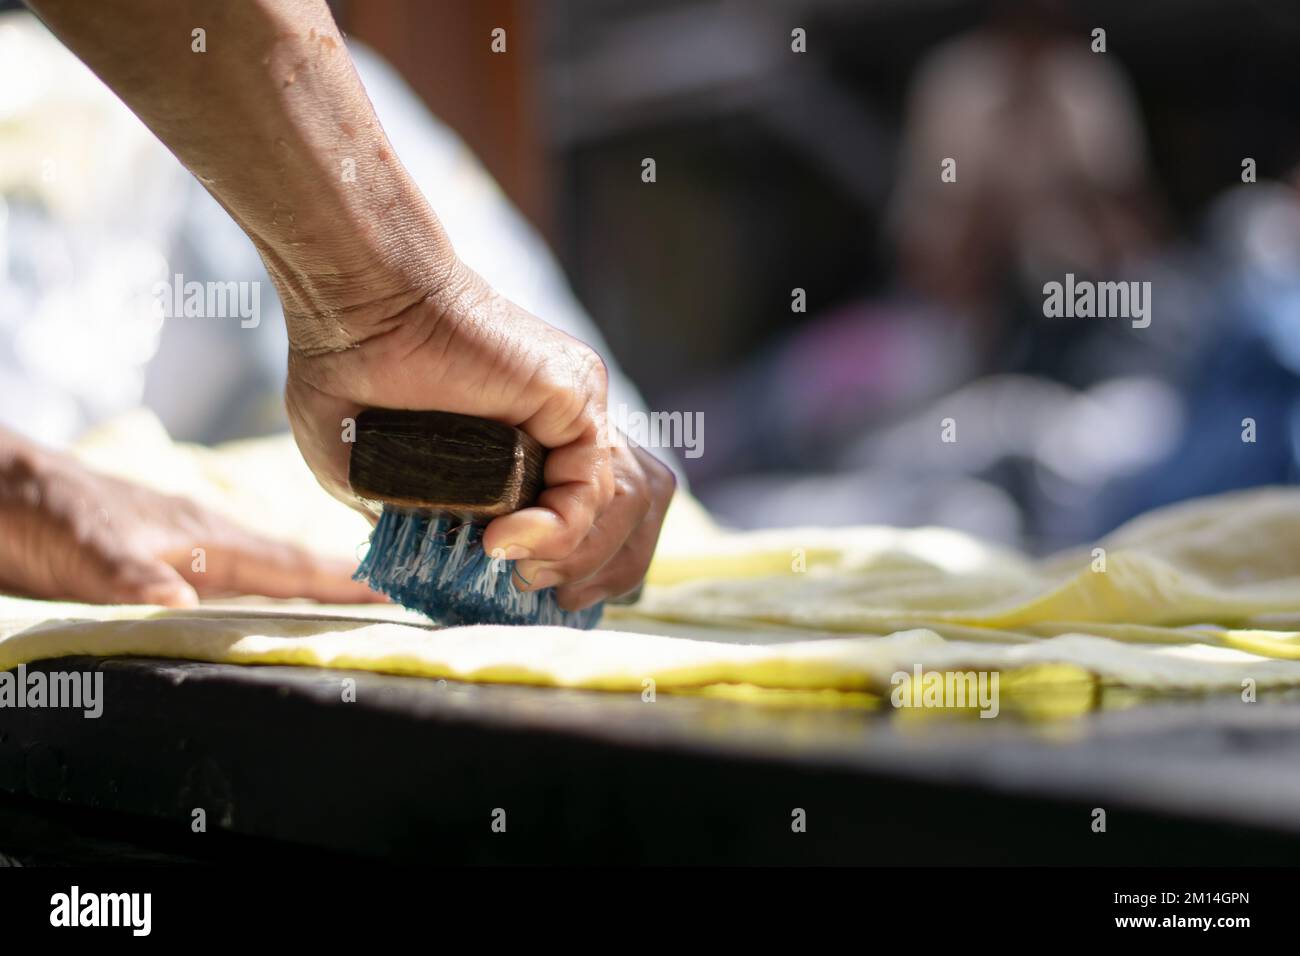 Hands of a man with a brush washing the clothes in Dhobi Ghat, Mumbai, India. Indian Labour, worker or labor, poor and hard working. Skill India. Swan Stock Photo